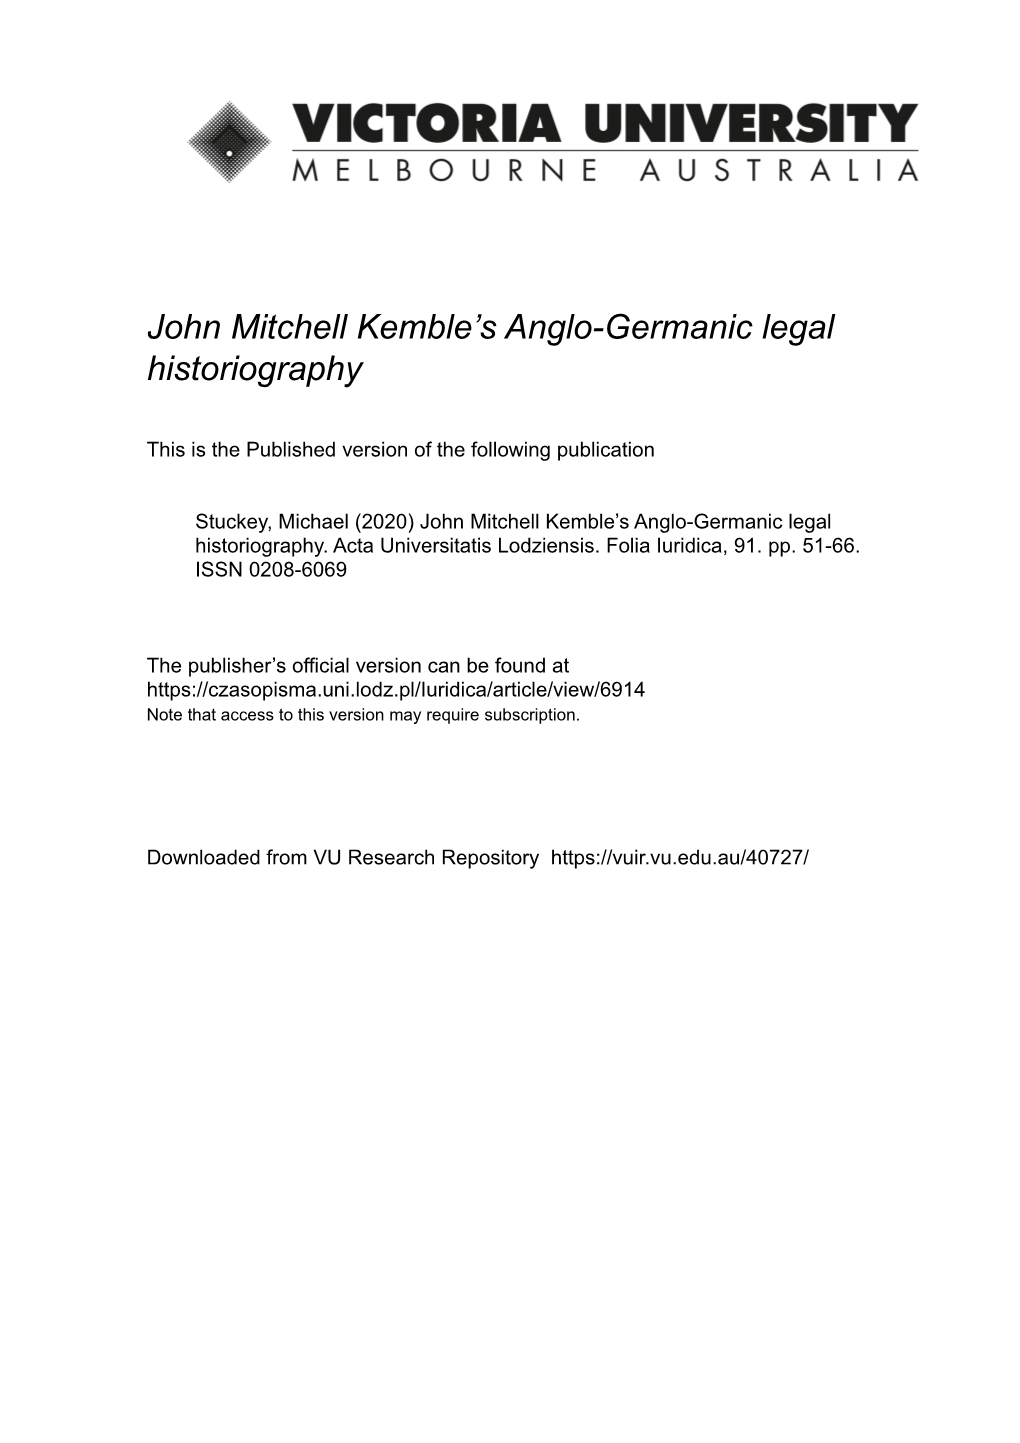 John Mitchell Kemble's Anglo-Germanic Legal Historiography